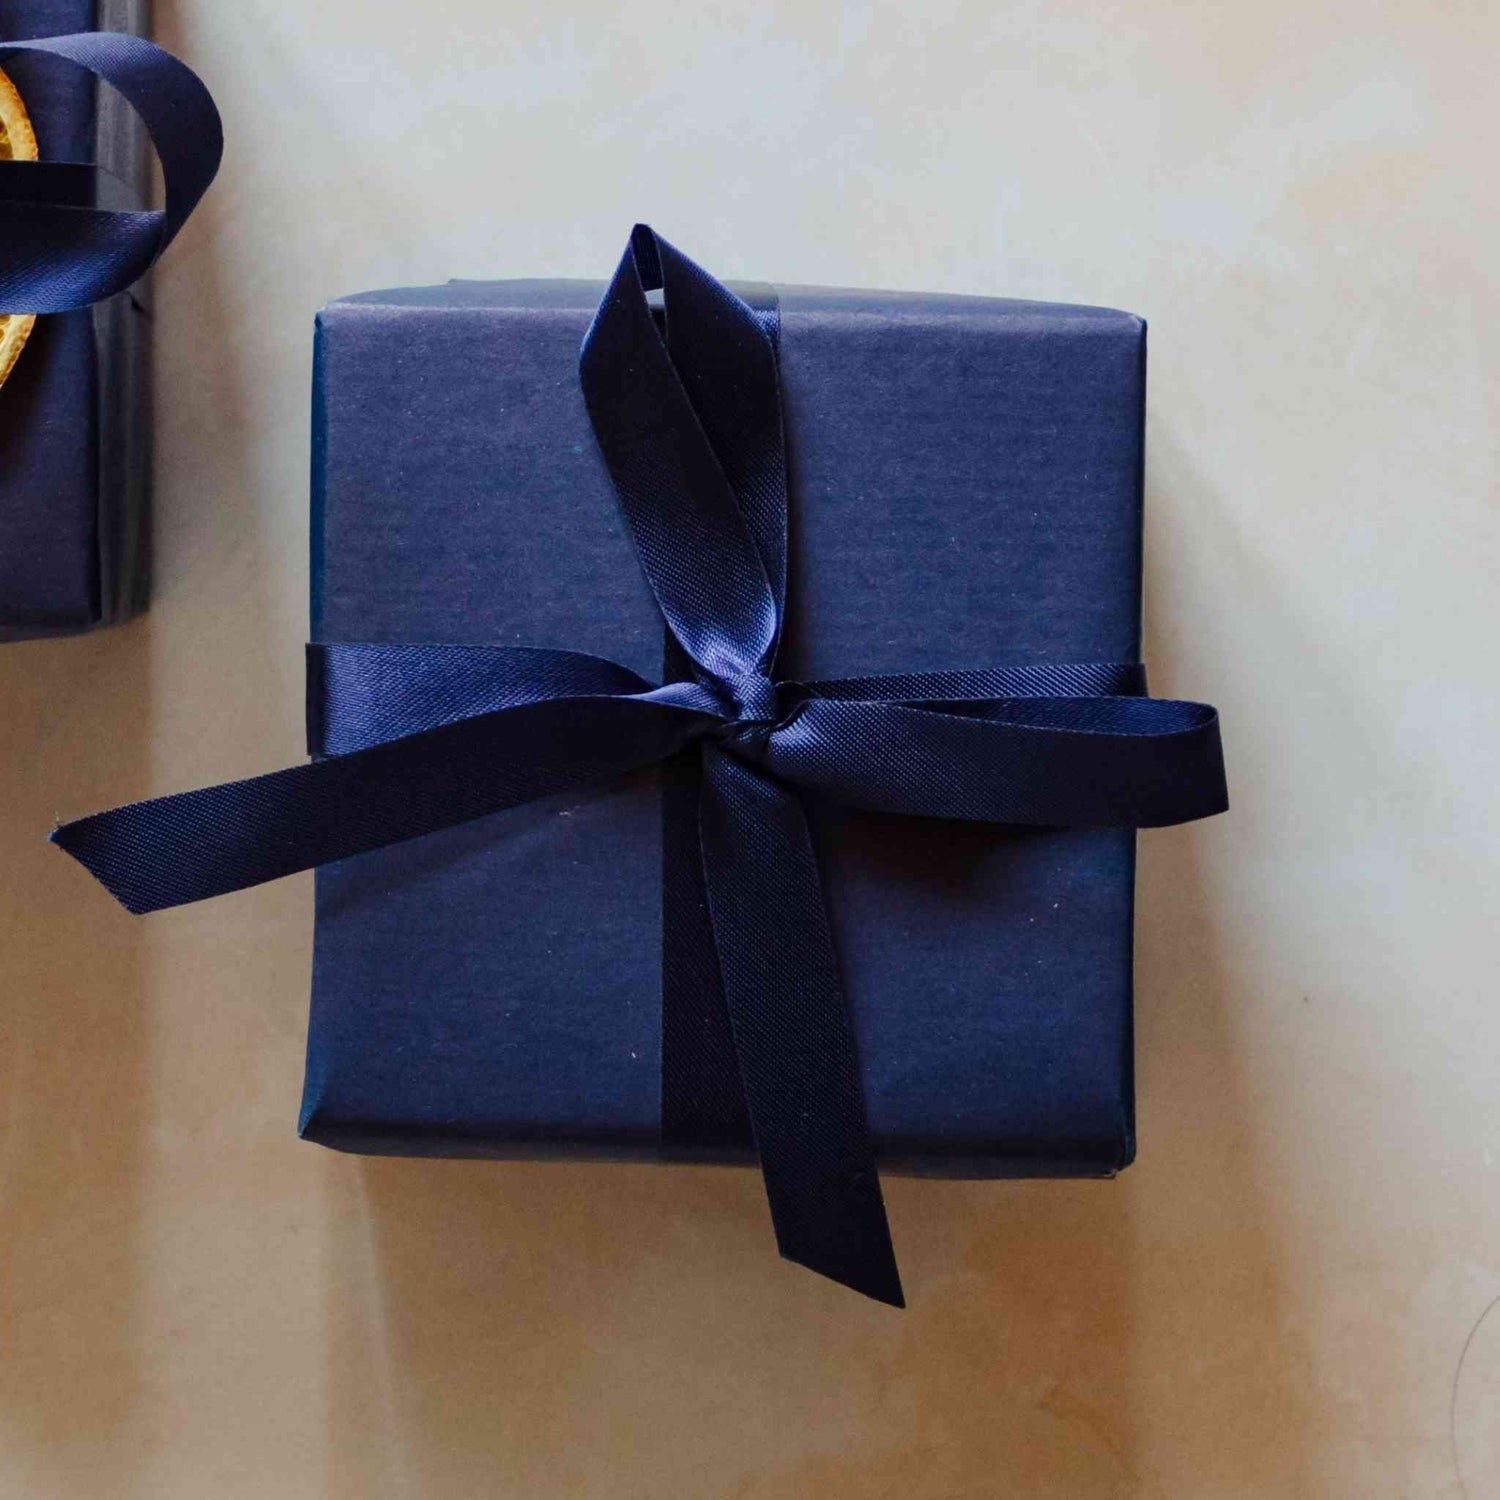 A 200g blackberry scented soy candle from the Home County Co. is shown with luxury Gift Wrap. The candle is wrapped in luxury navy wrapping paper secured with navy ribbon.